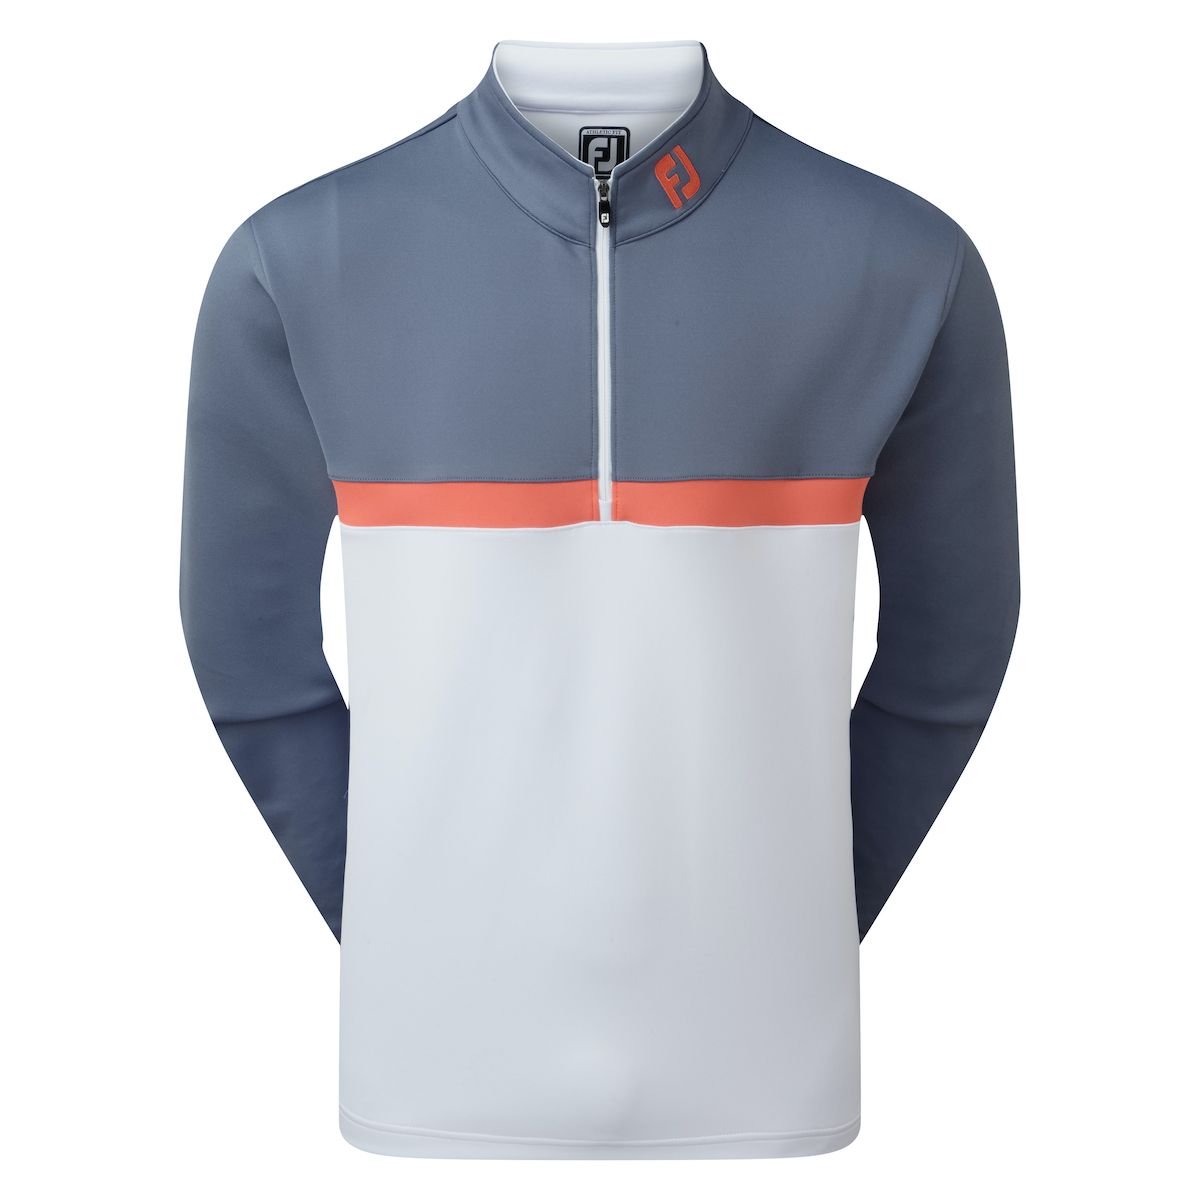 Footjoy Colour Blocked Chill-Out Pullover Herren grau/weiß/coral